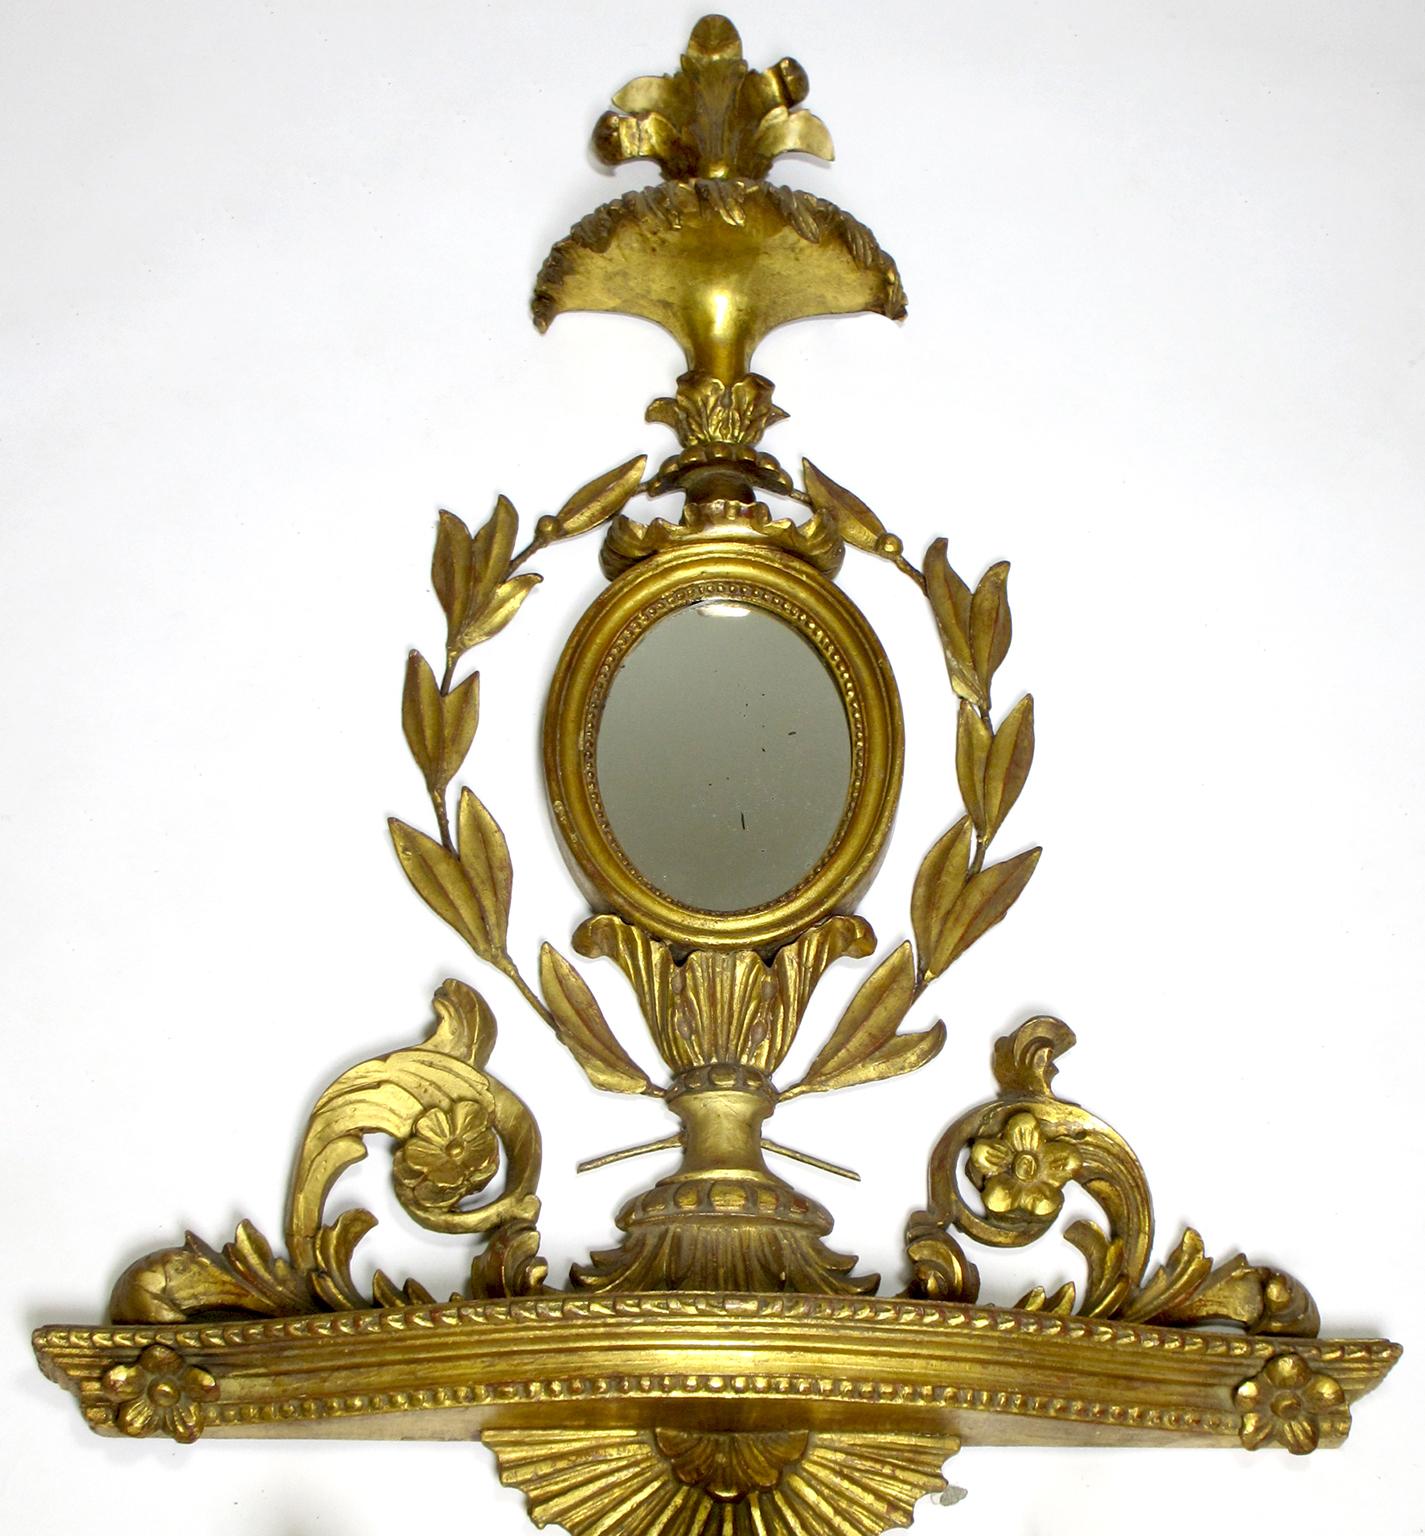 French 19th Century Louis XVI Style Giltwood Carved Sconce Mirror and Candelabra In Fair Condition For Sale In Los Angeles, CA